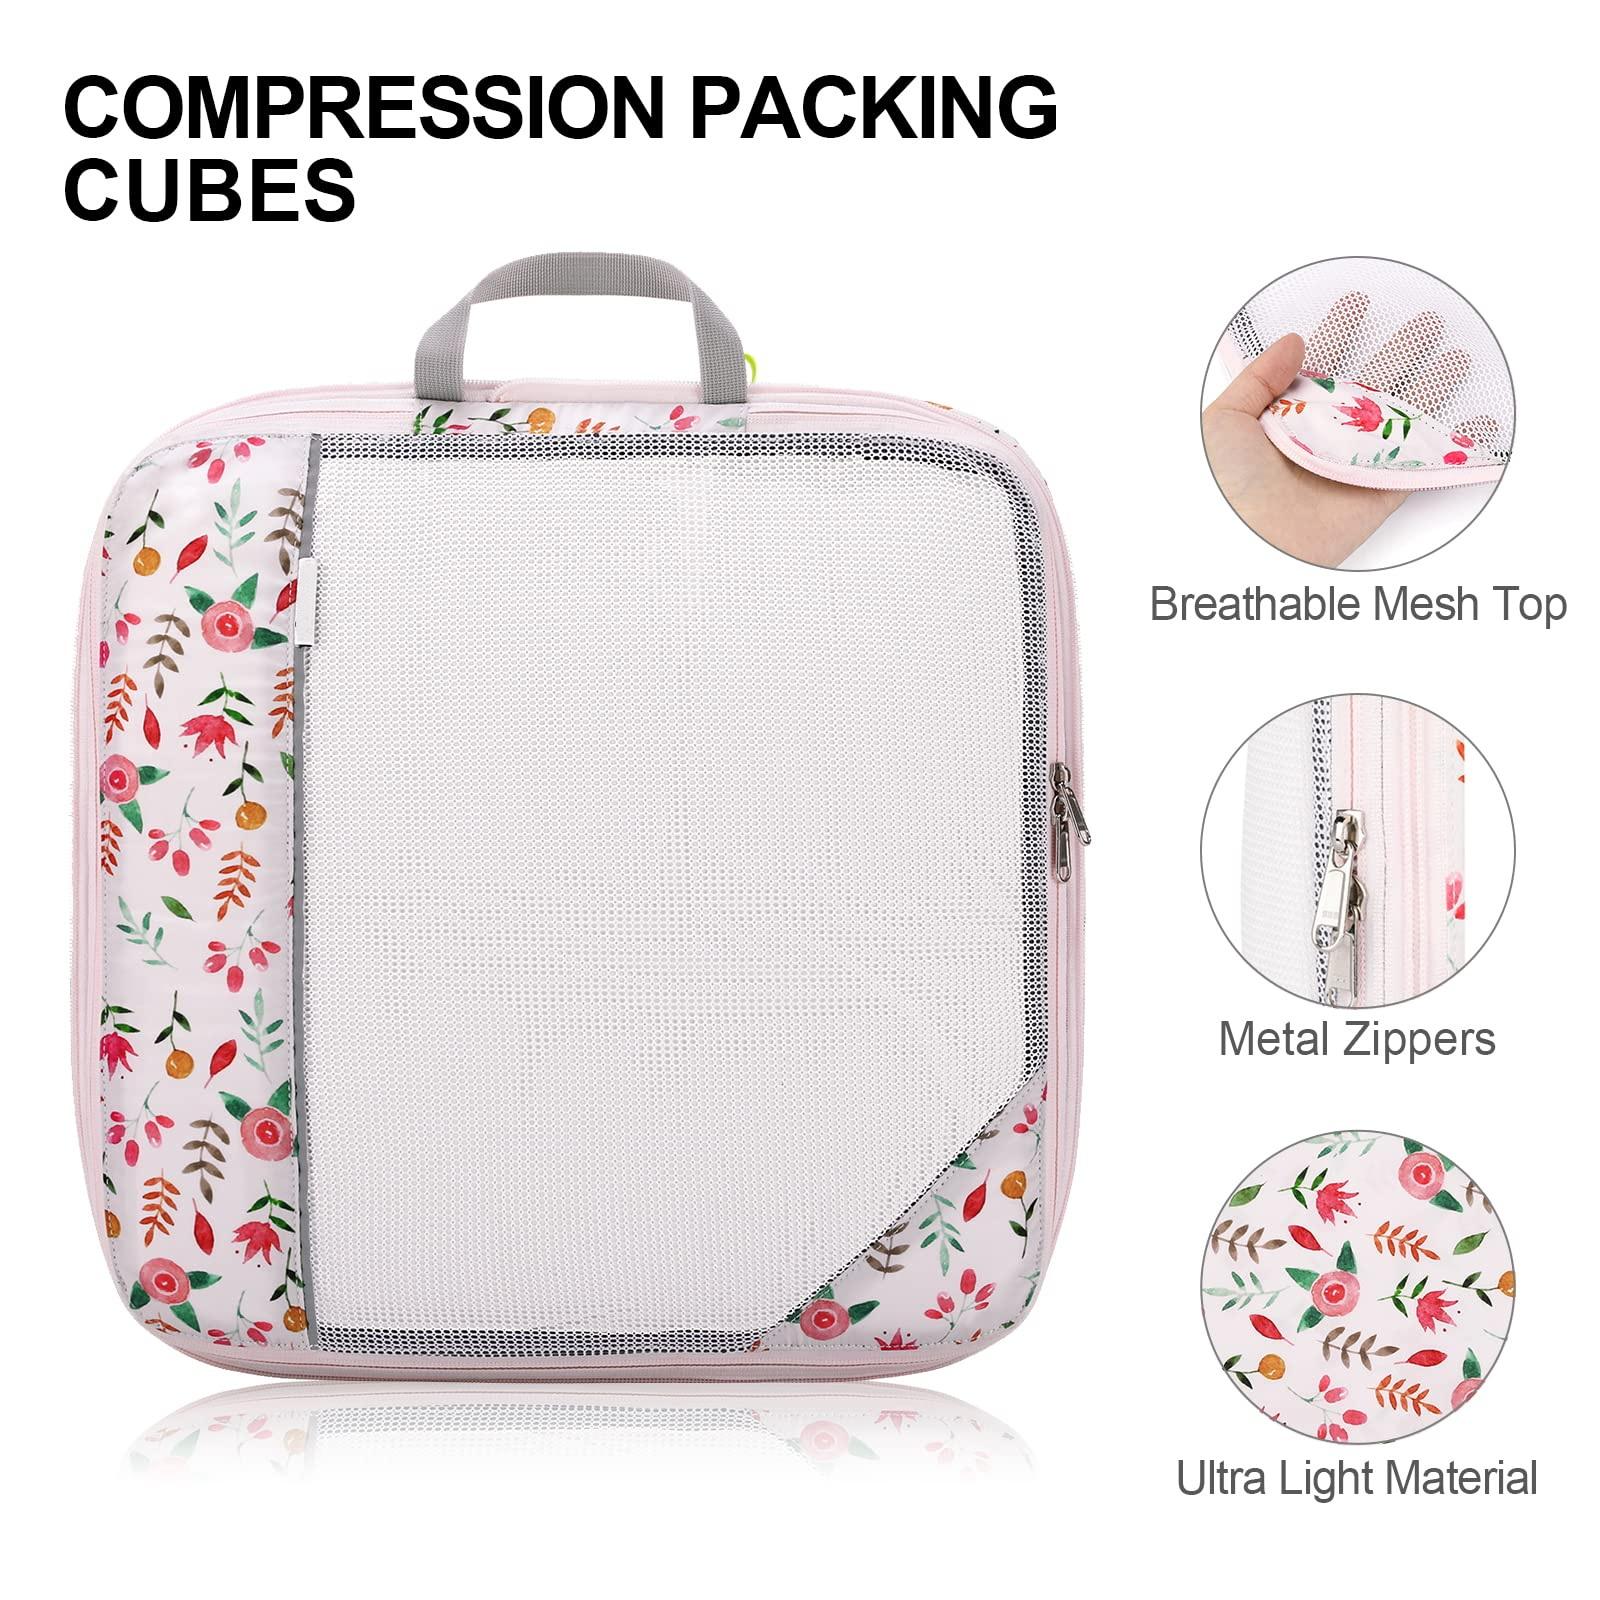 Compression Packing Cubes 6 Sets Product Details